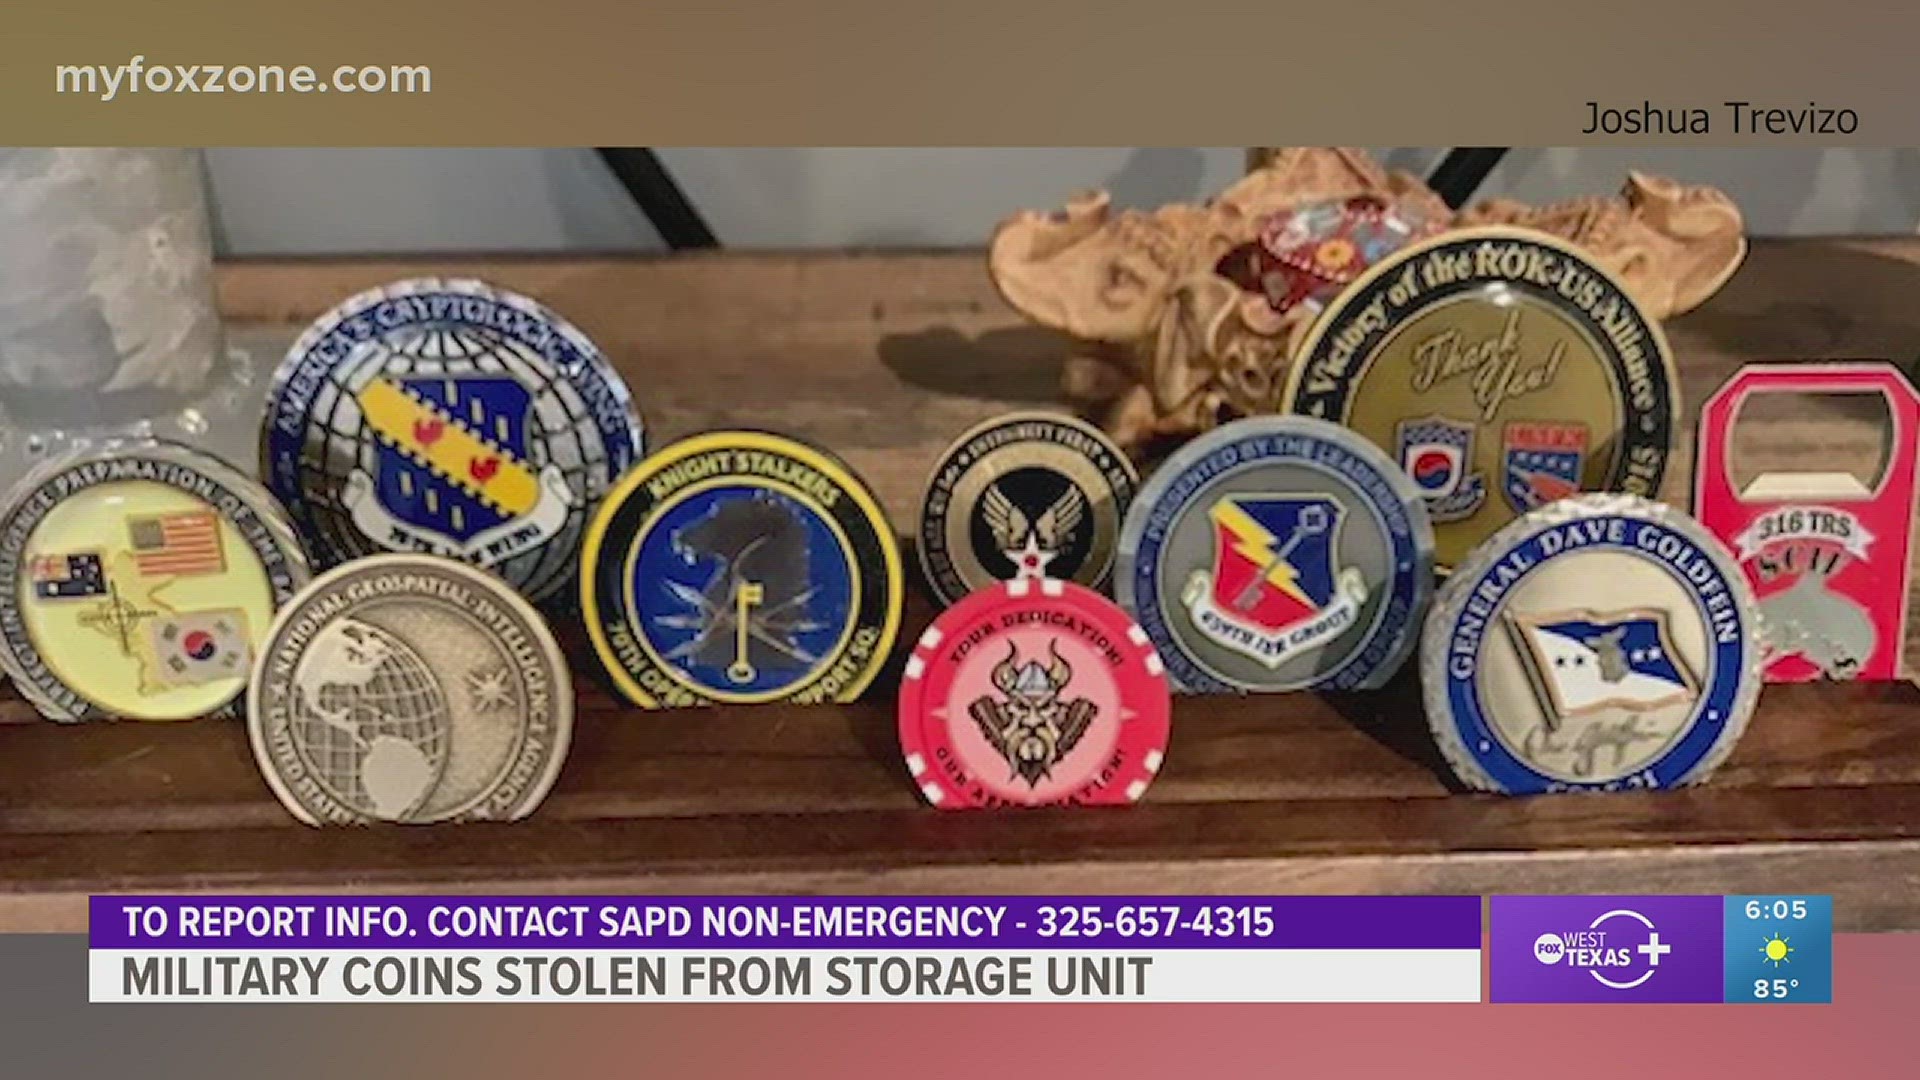 After a storage break-in, Joshua Trevizo looks to find his missing military coins.